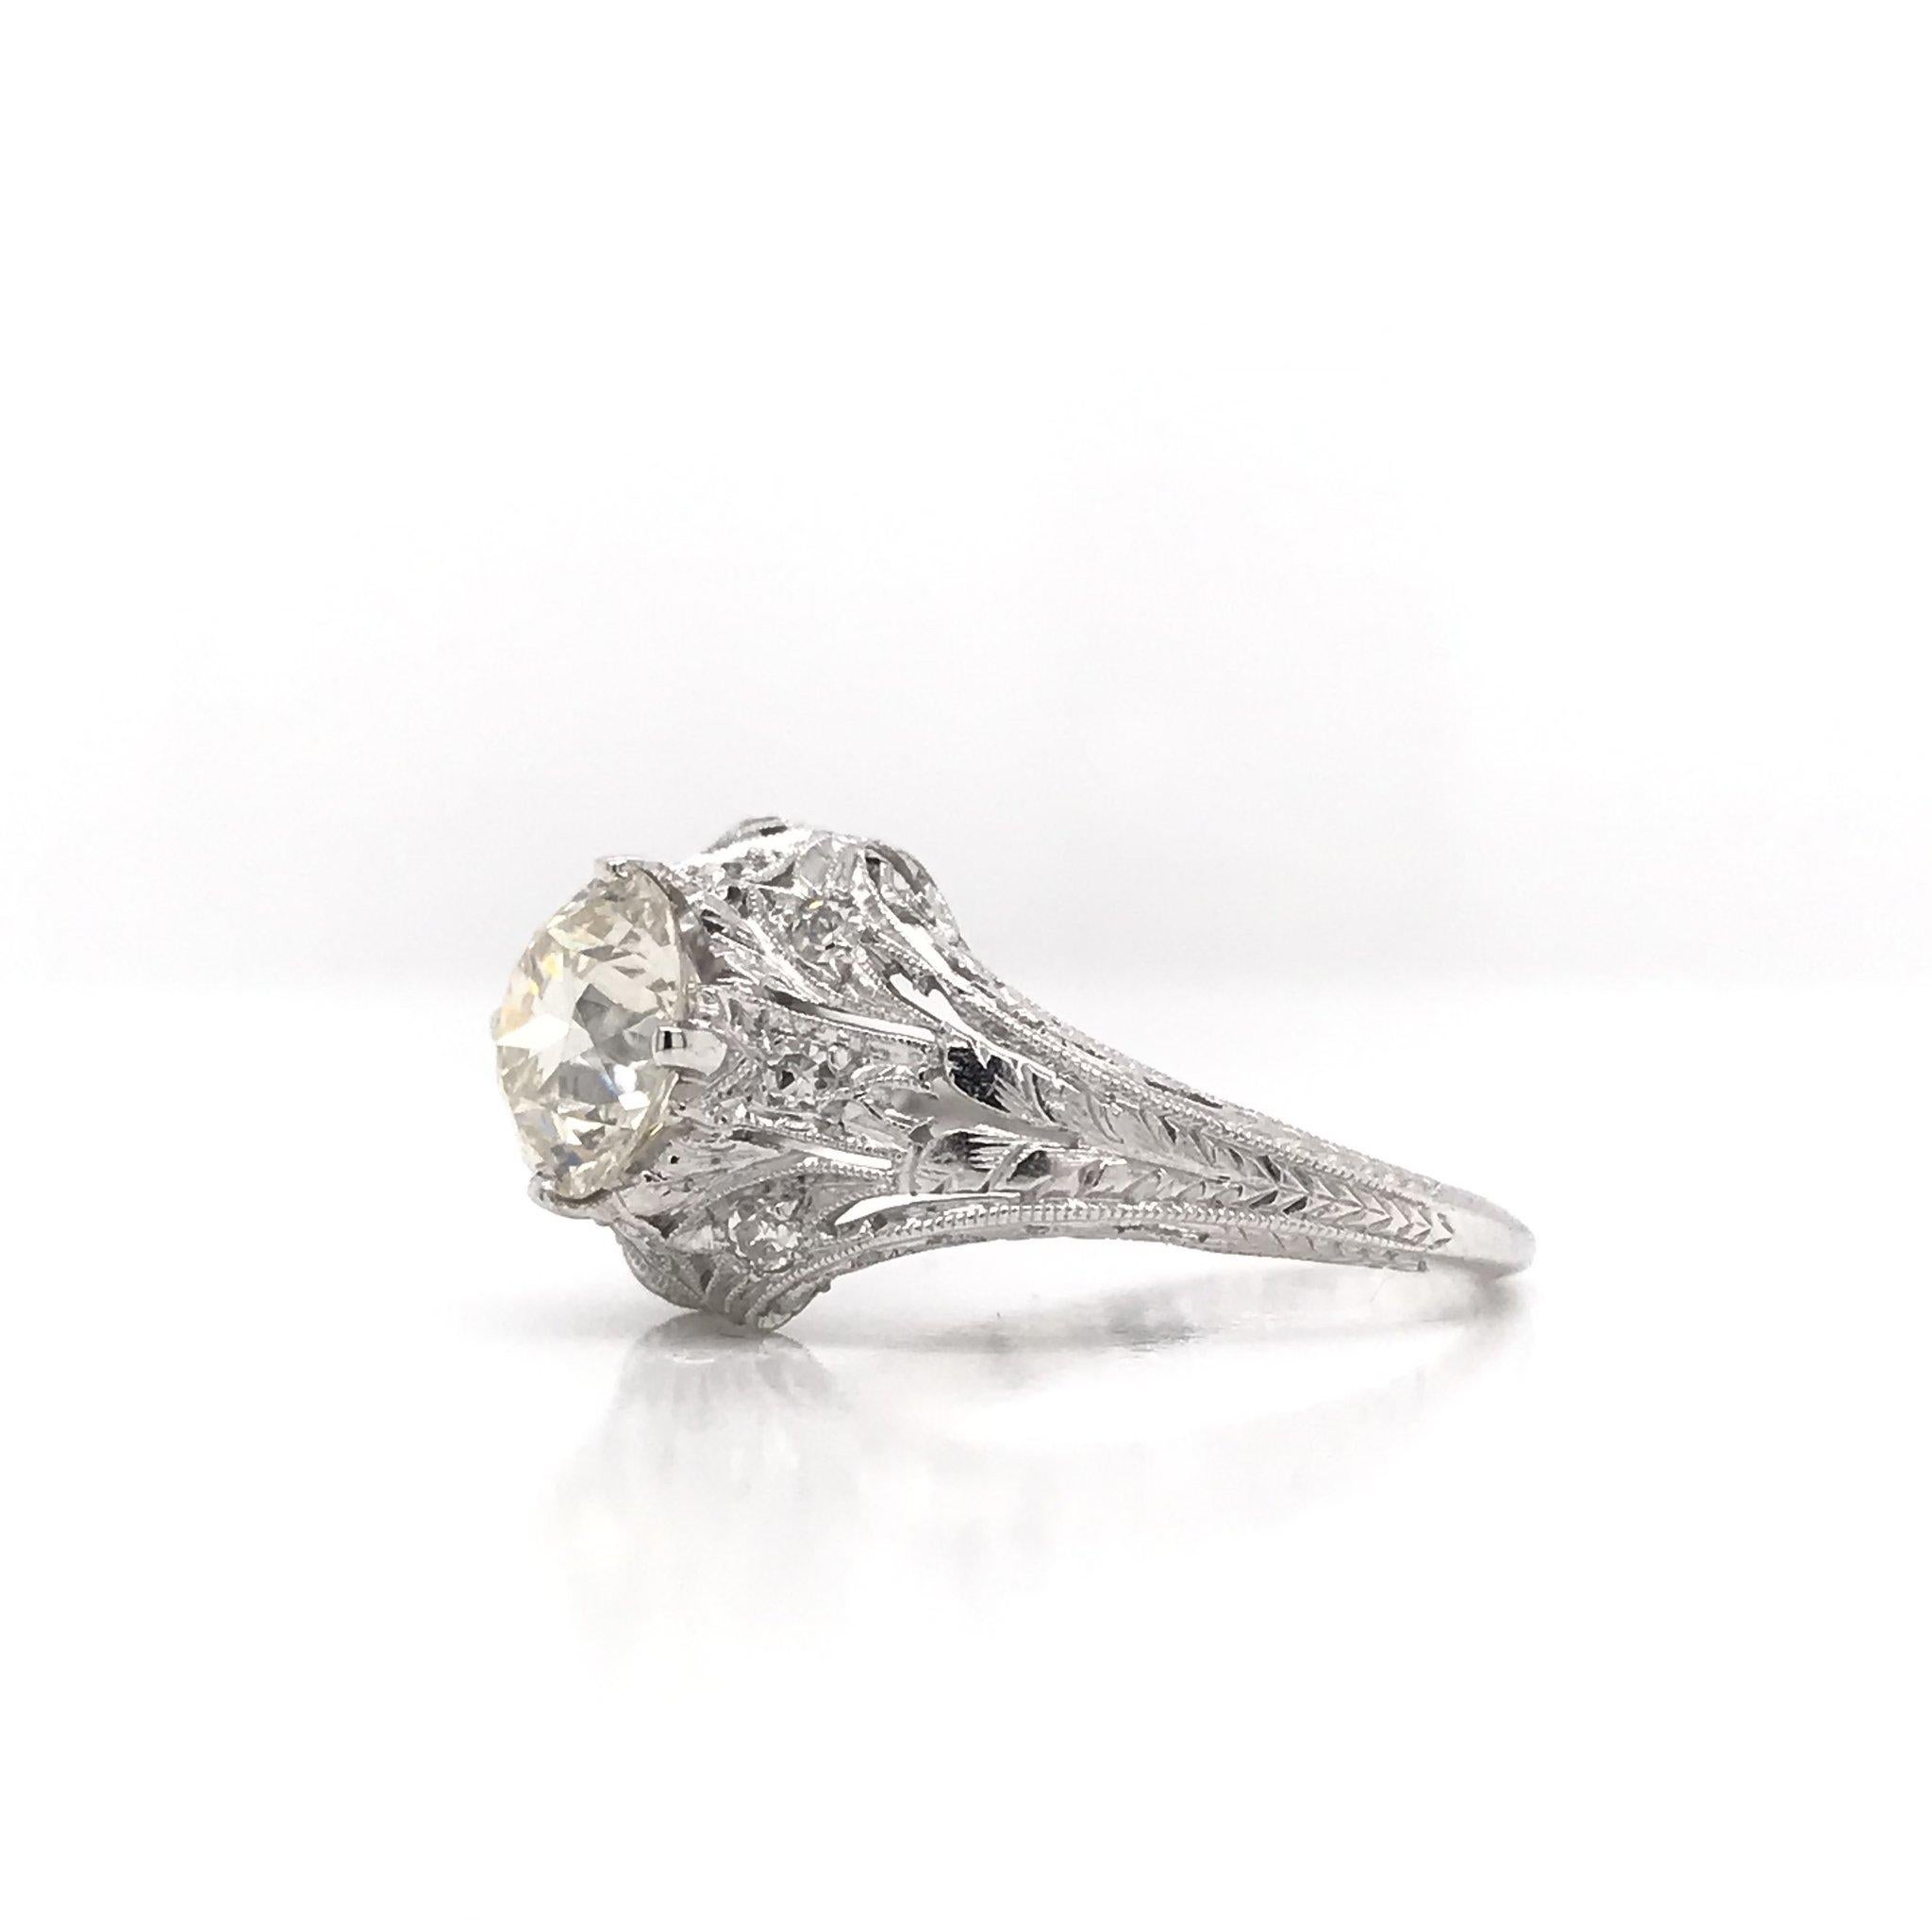 This stunning antique piece was handcrafted sometime during the Edwardian design period ( 1900-1920 ). Antique hand engravings on the inside of the shank indicate the ring was dedicated 12/25/20. The center diamond measures approximately 1.54 carats